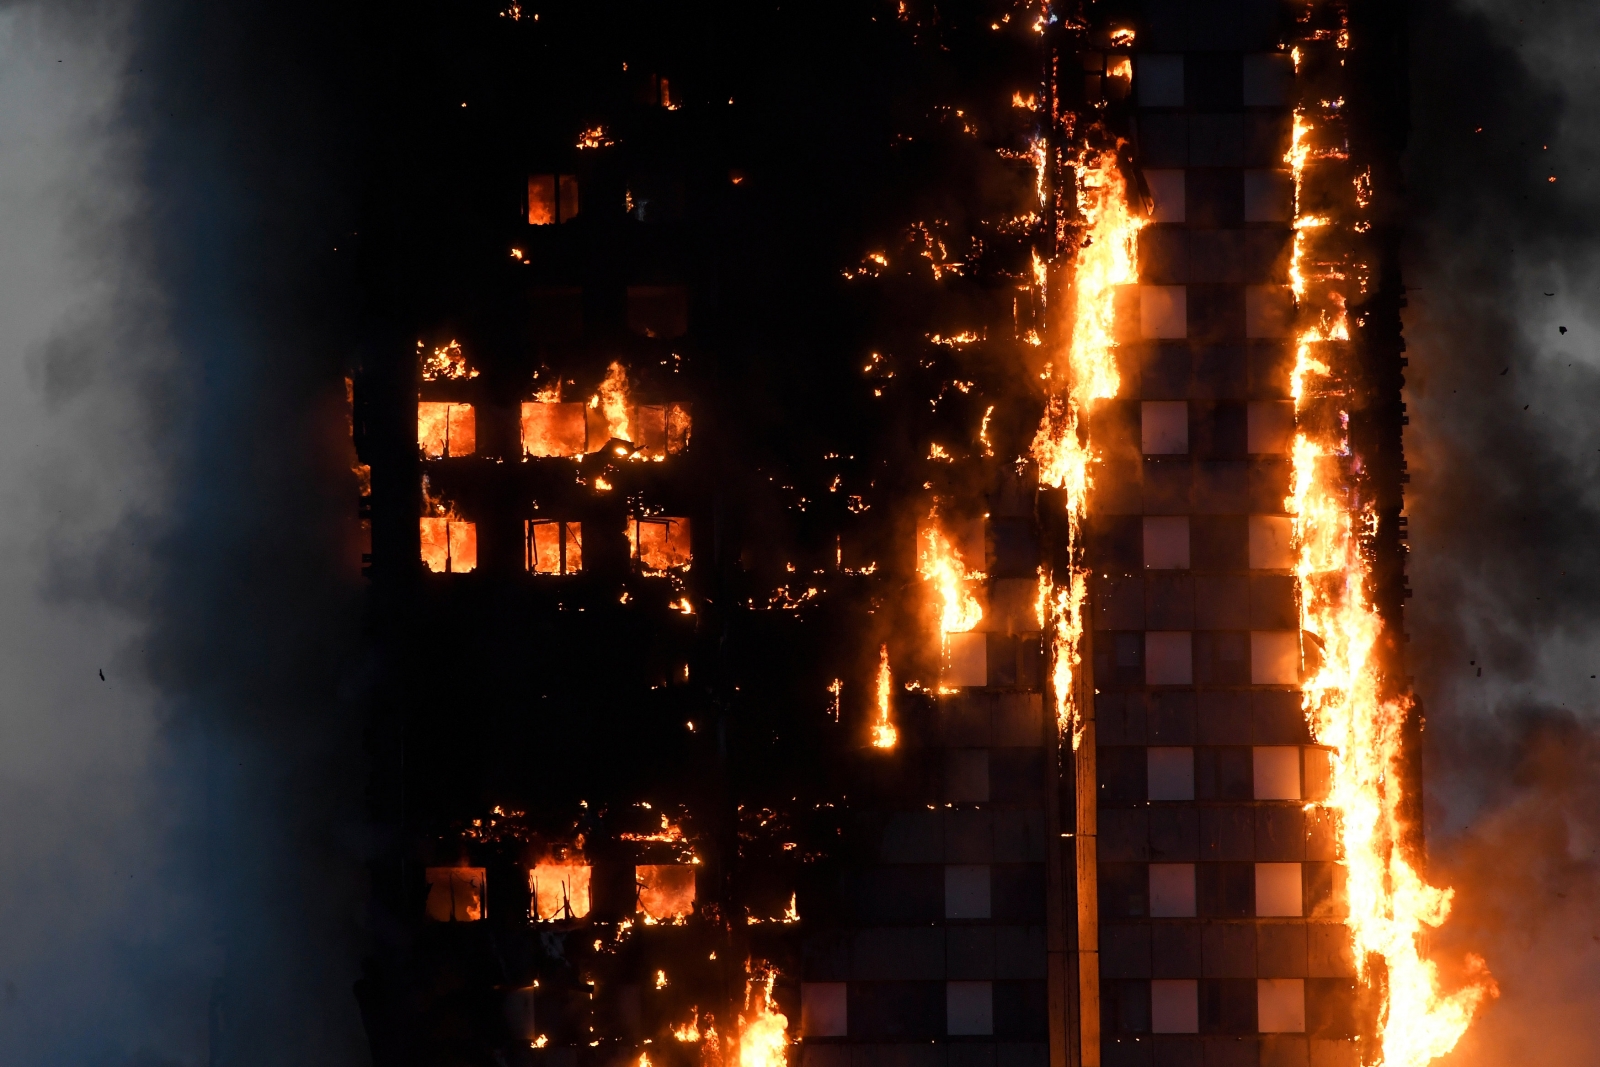 27-storey Grenfell Tower Engulfed In Fire In West London